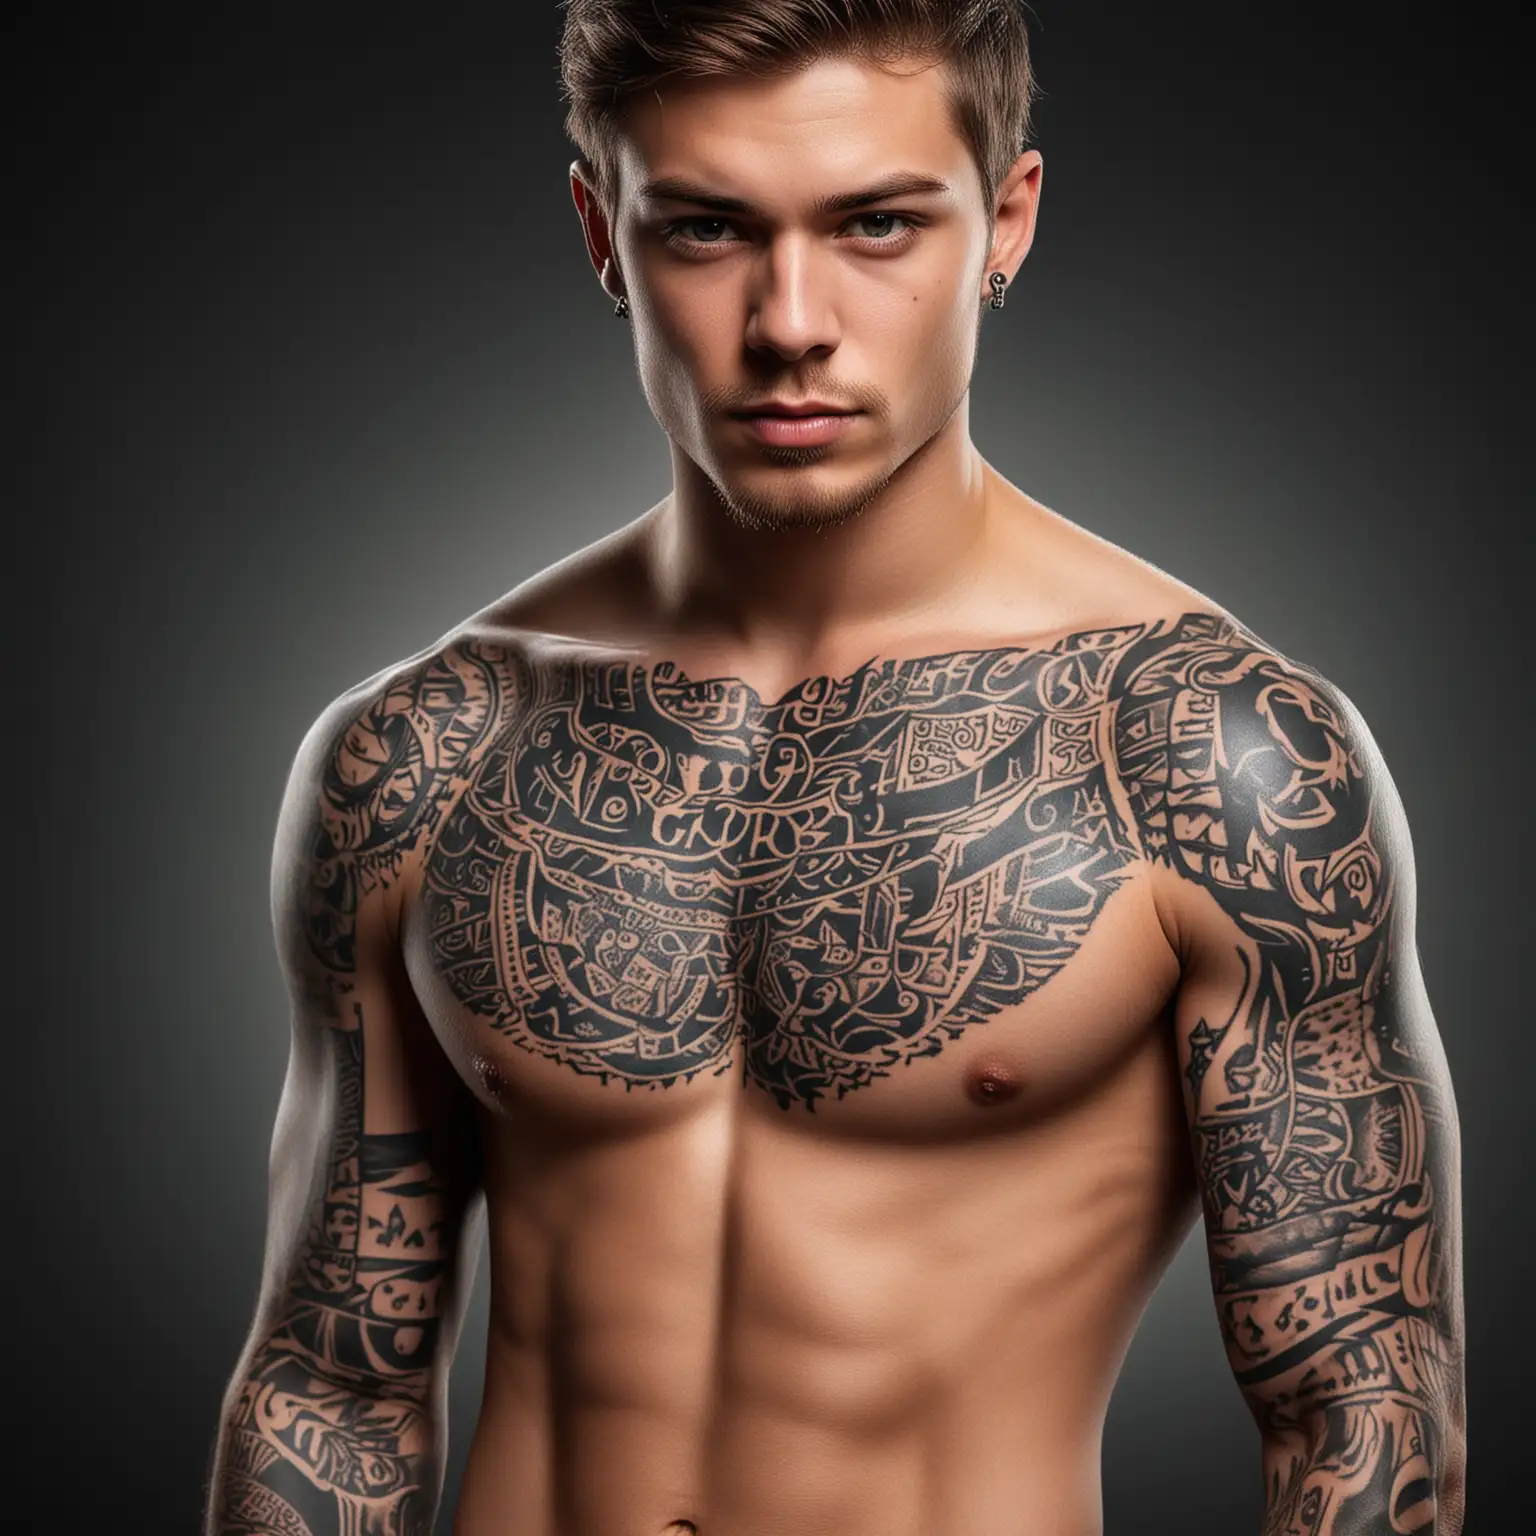 Stylized CloseUp Portrait of a Handsome Boy with Intricate Tattoos on Black Background